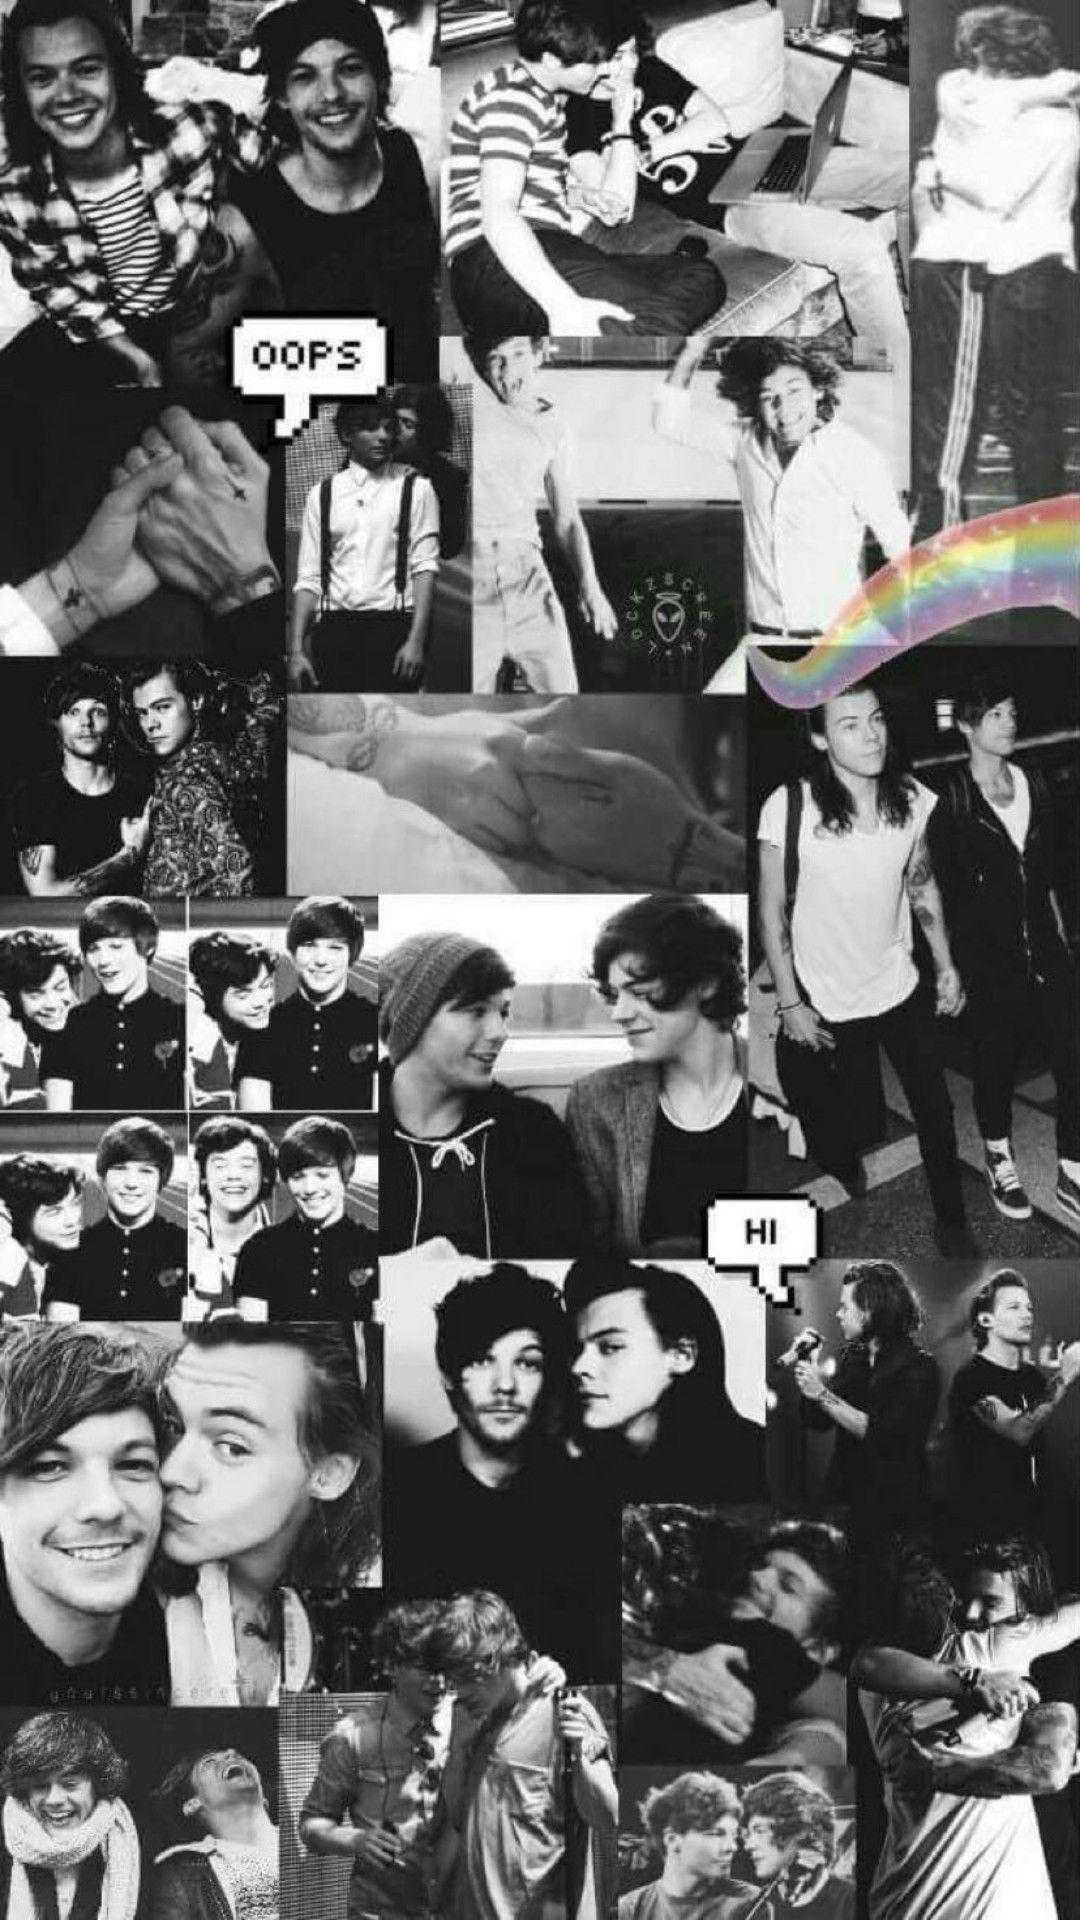 Larry Stylinson Wallpapers 1